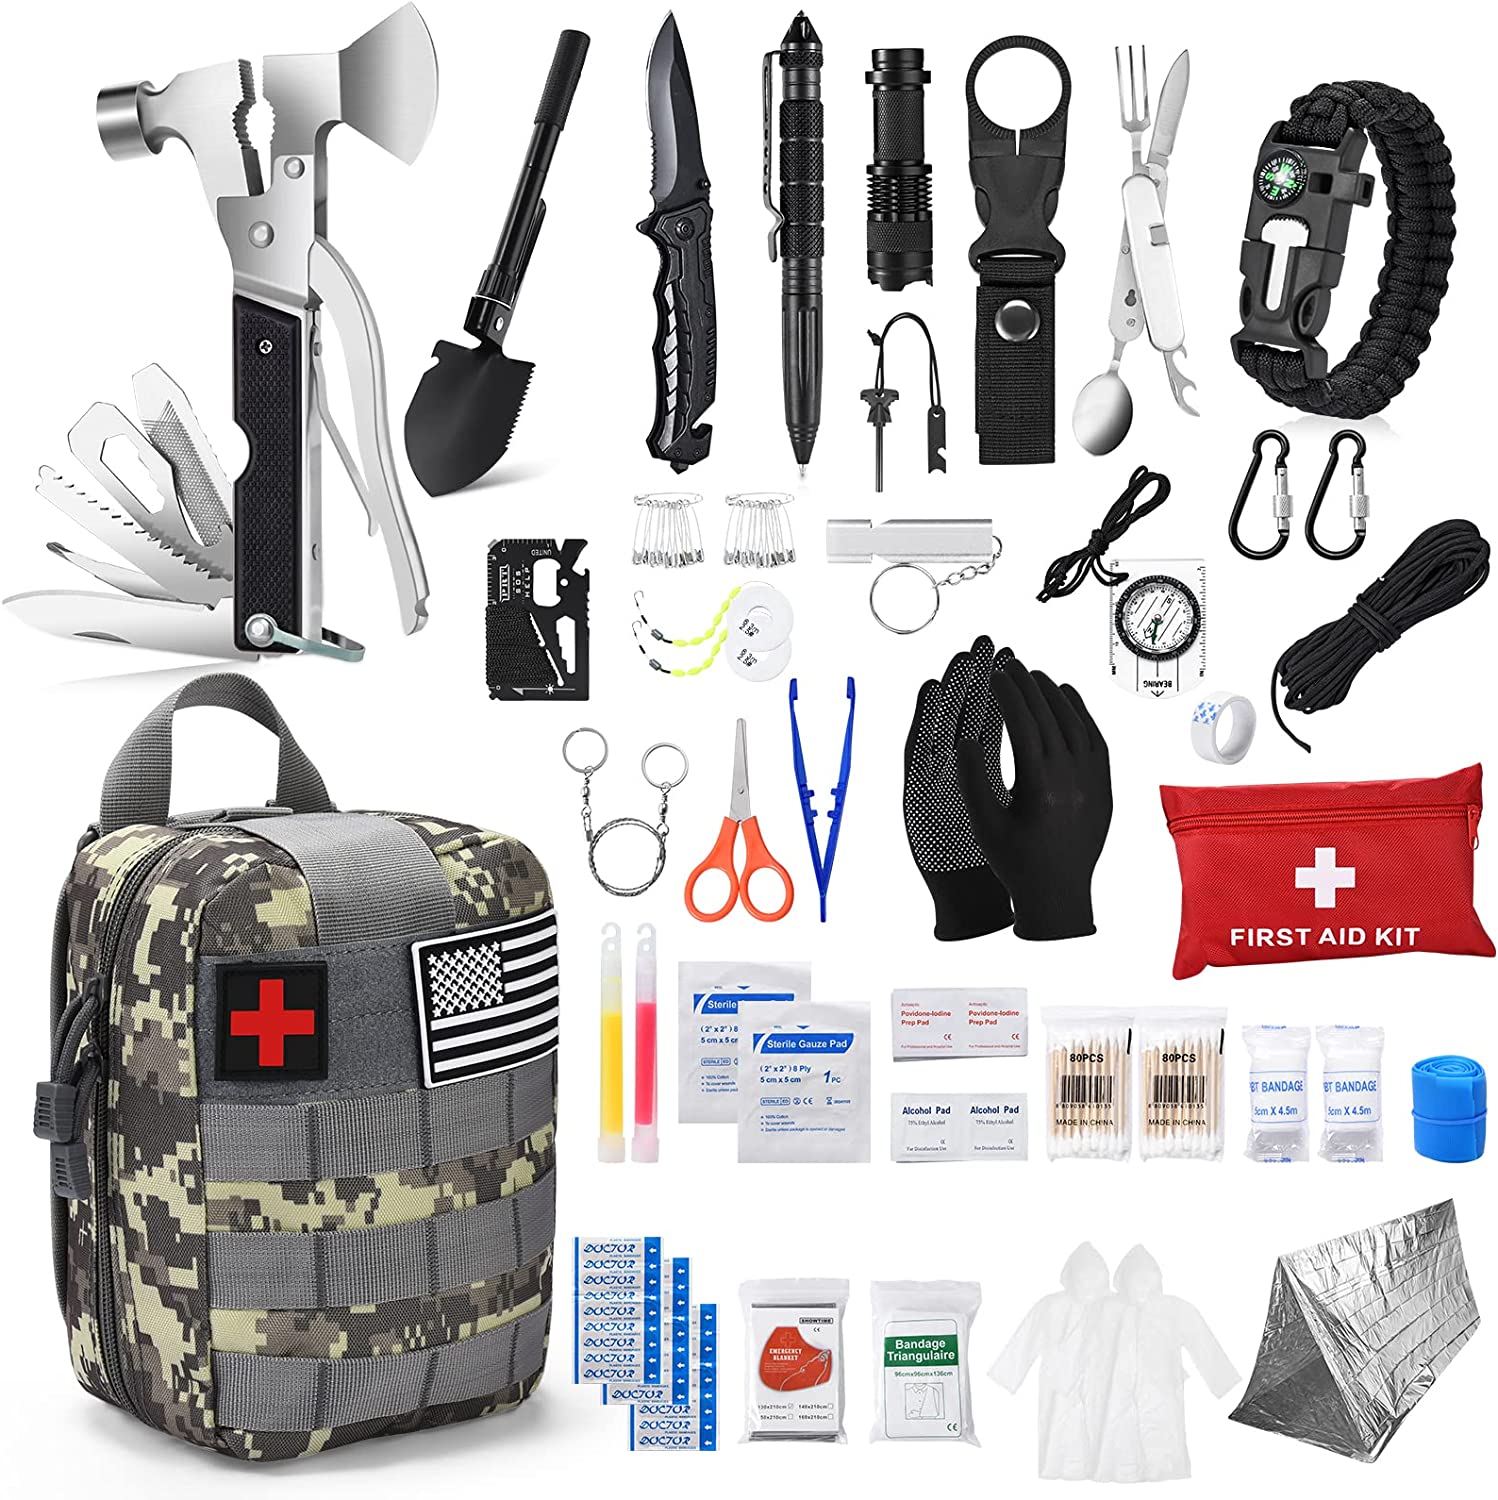 ZonGoods Emergency Survival Kit and First Aid Kit, 232Pcs Professional Survival Gear and Equipment with Molle Pouch, for Men Camping Outdoor Adventure